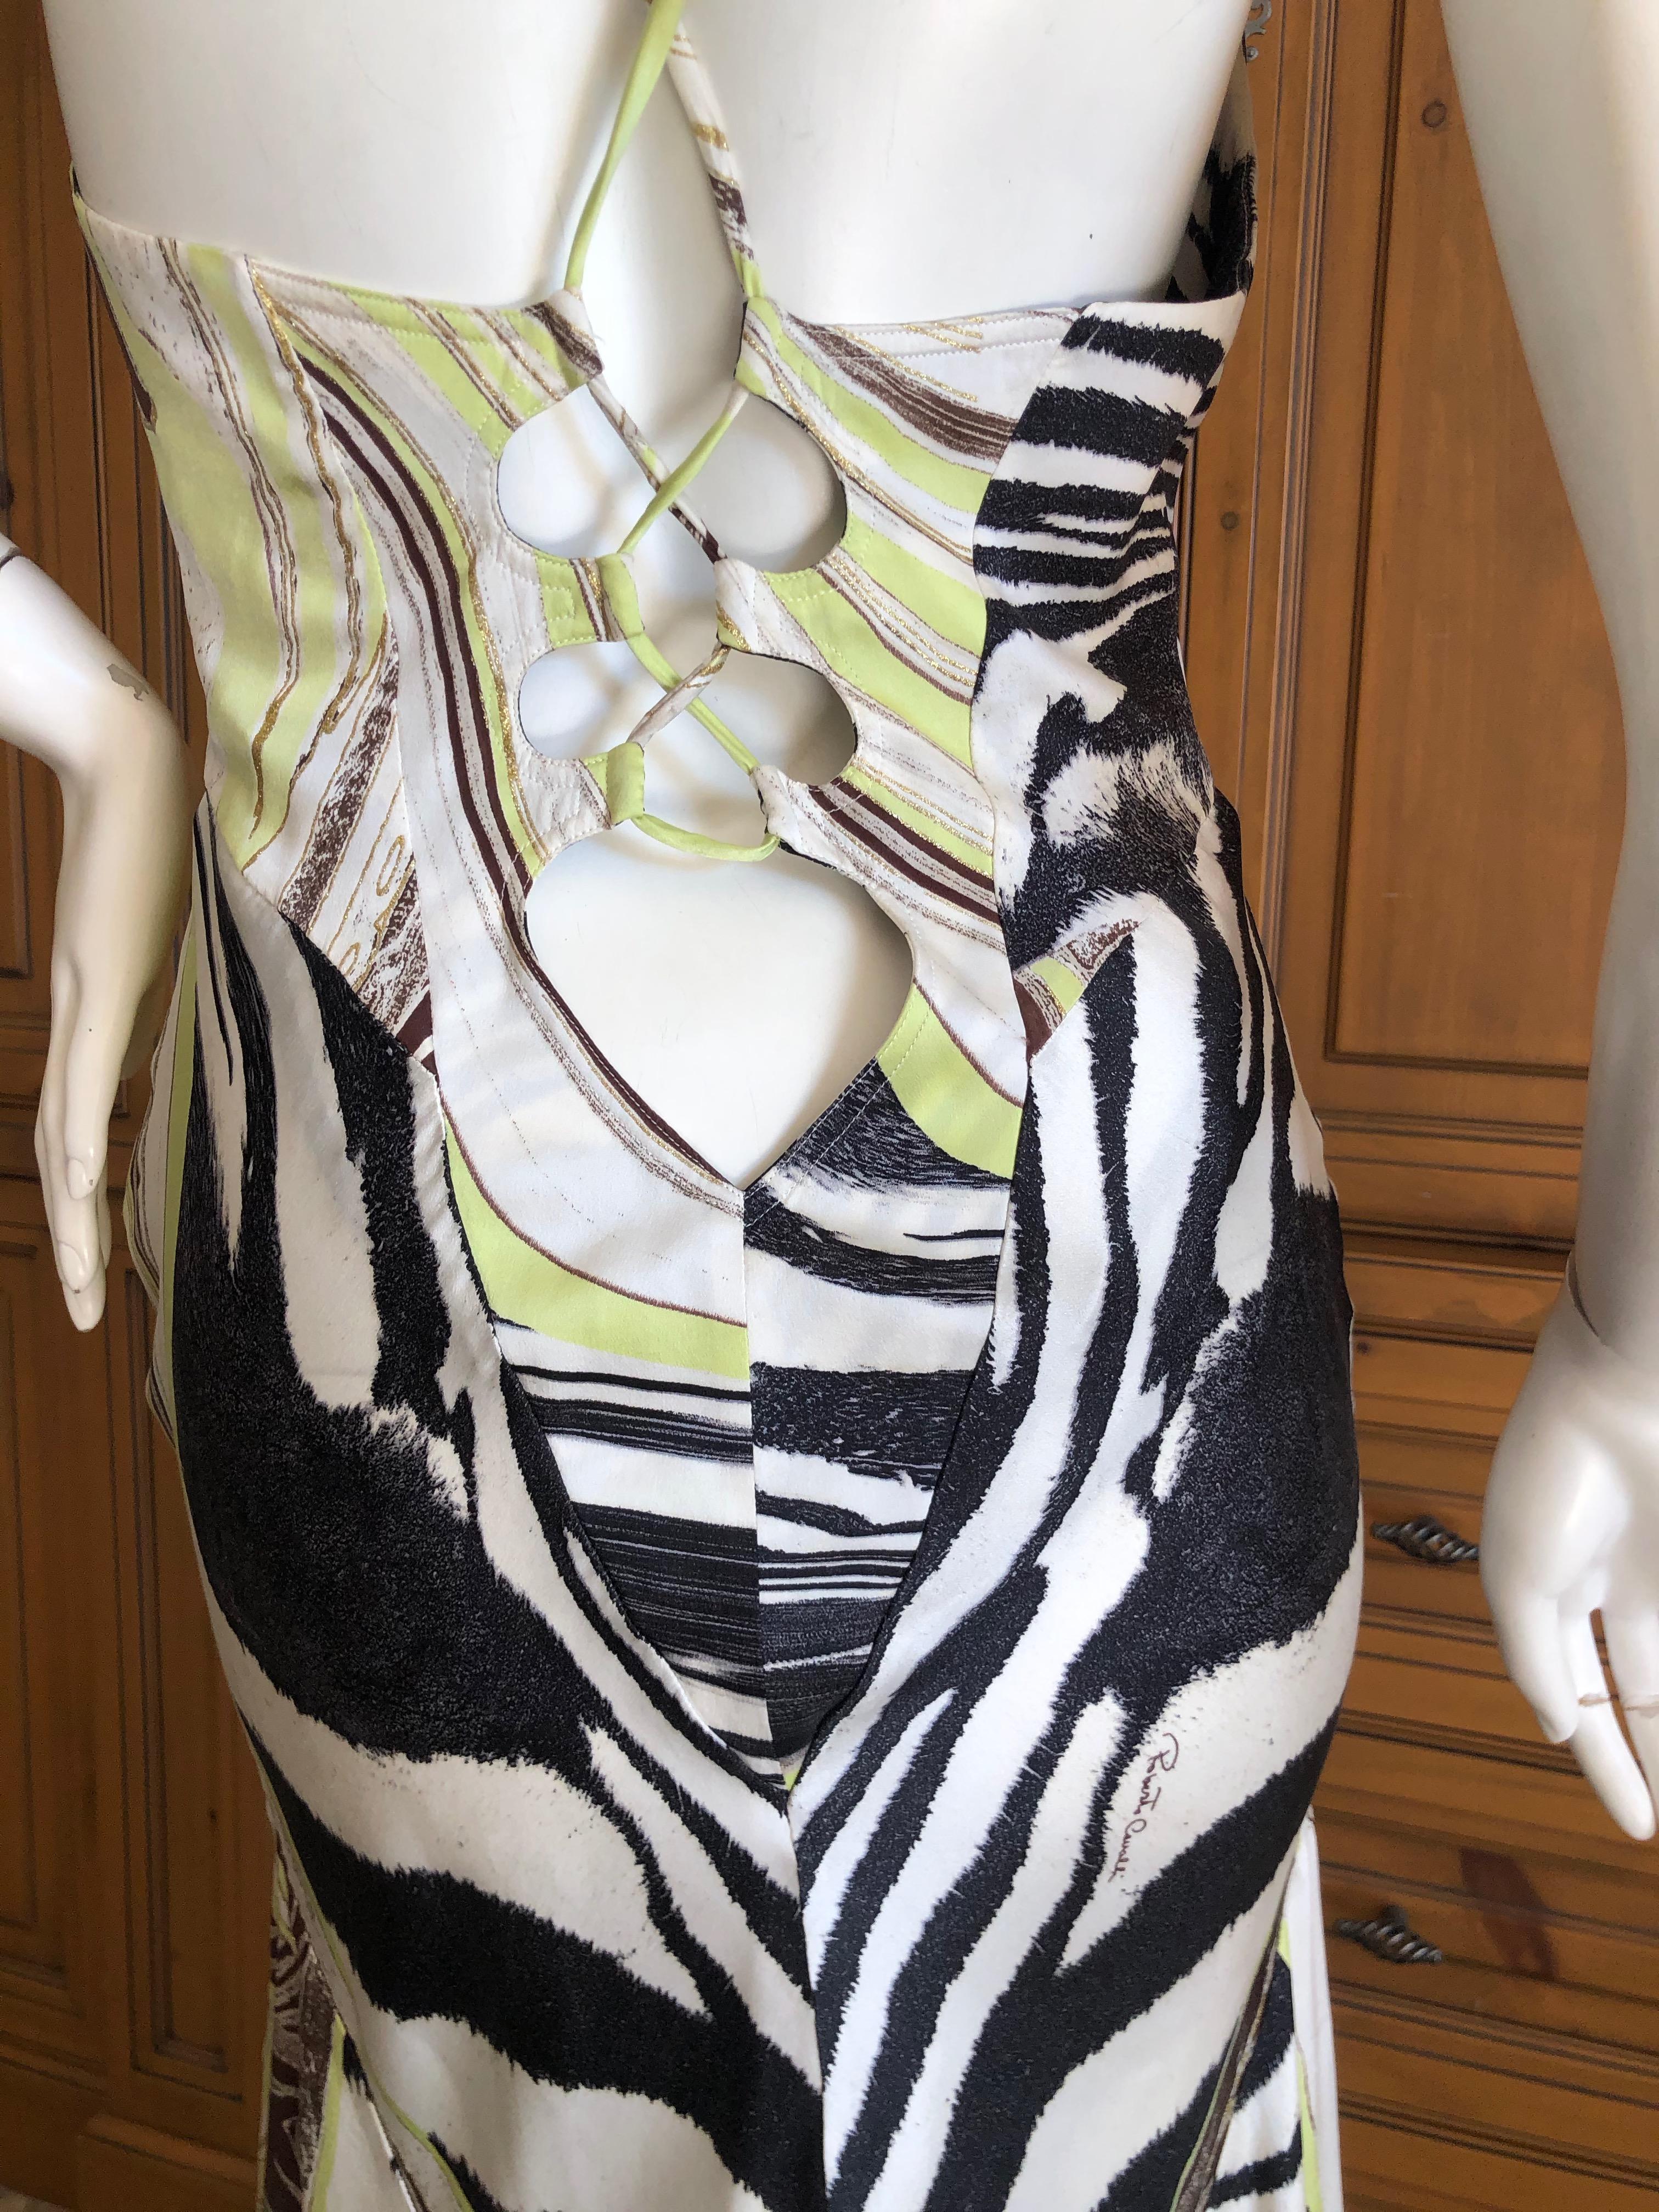 Roberto Cavalli Sexy Back Animal Print Silk Evening Dress with Train
Size M , there is a lot of stretch
Bust 38